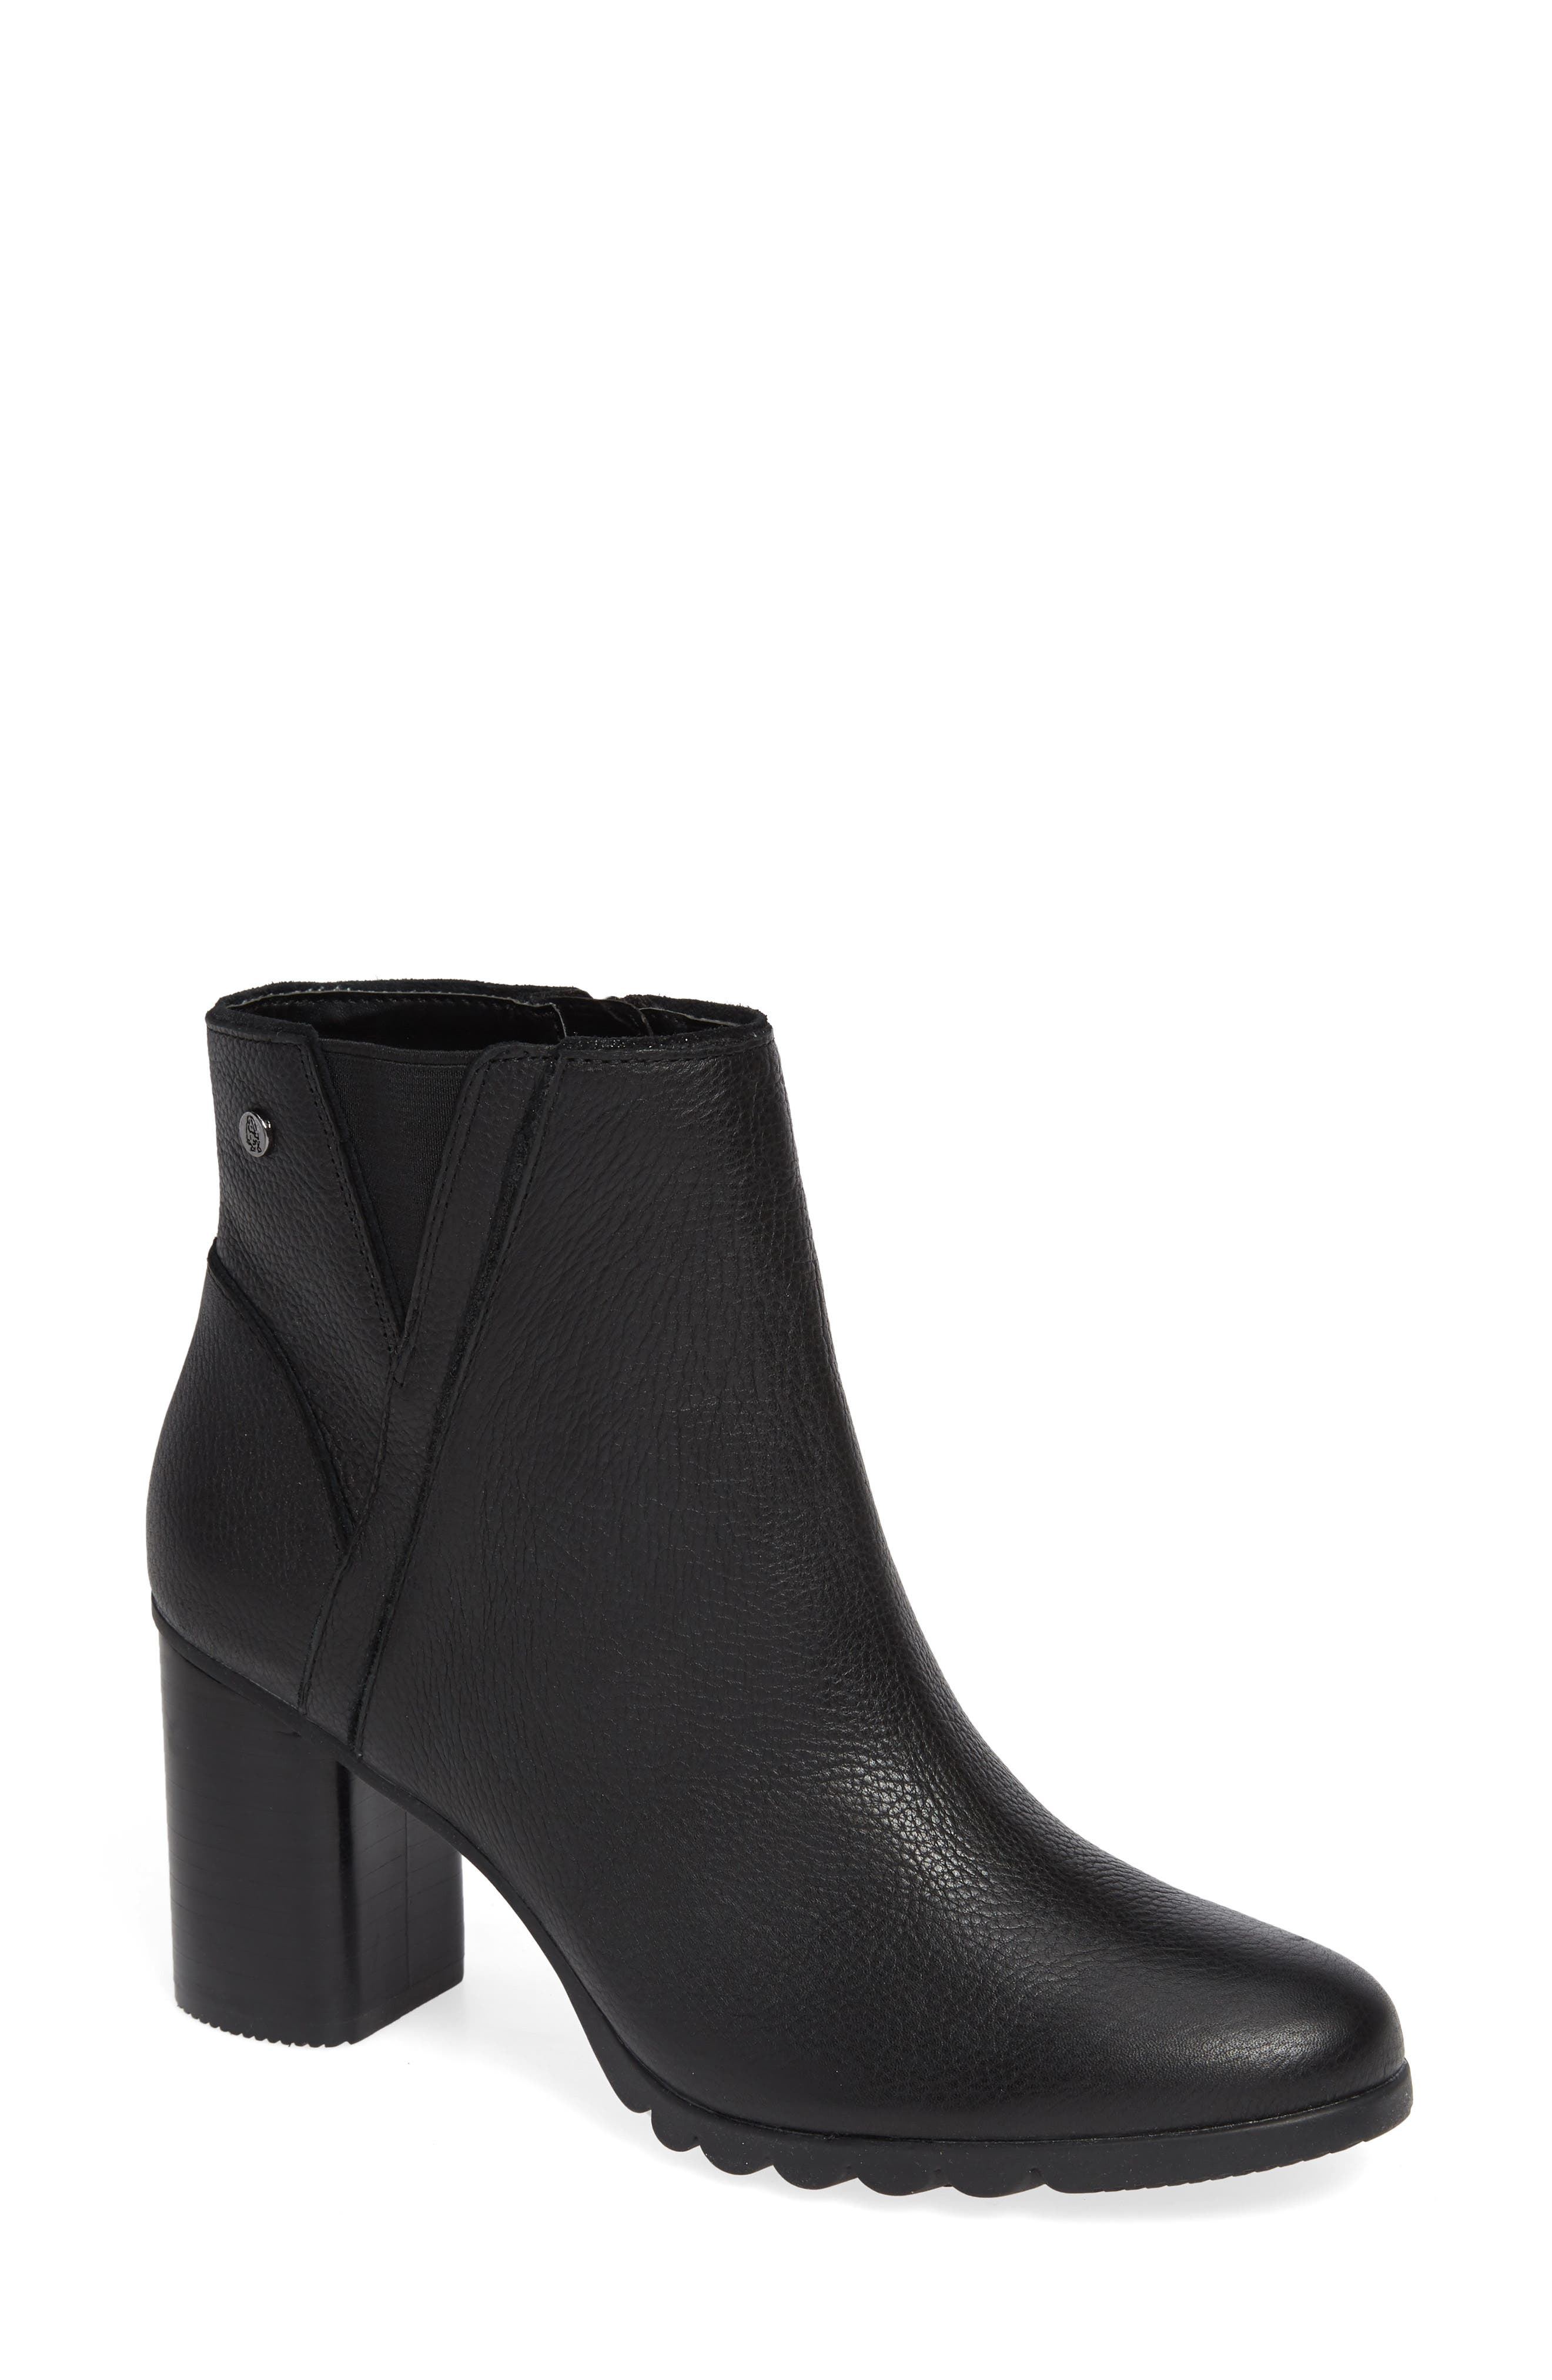 hush puppies ankle boots